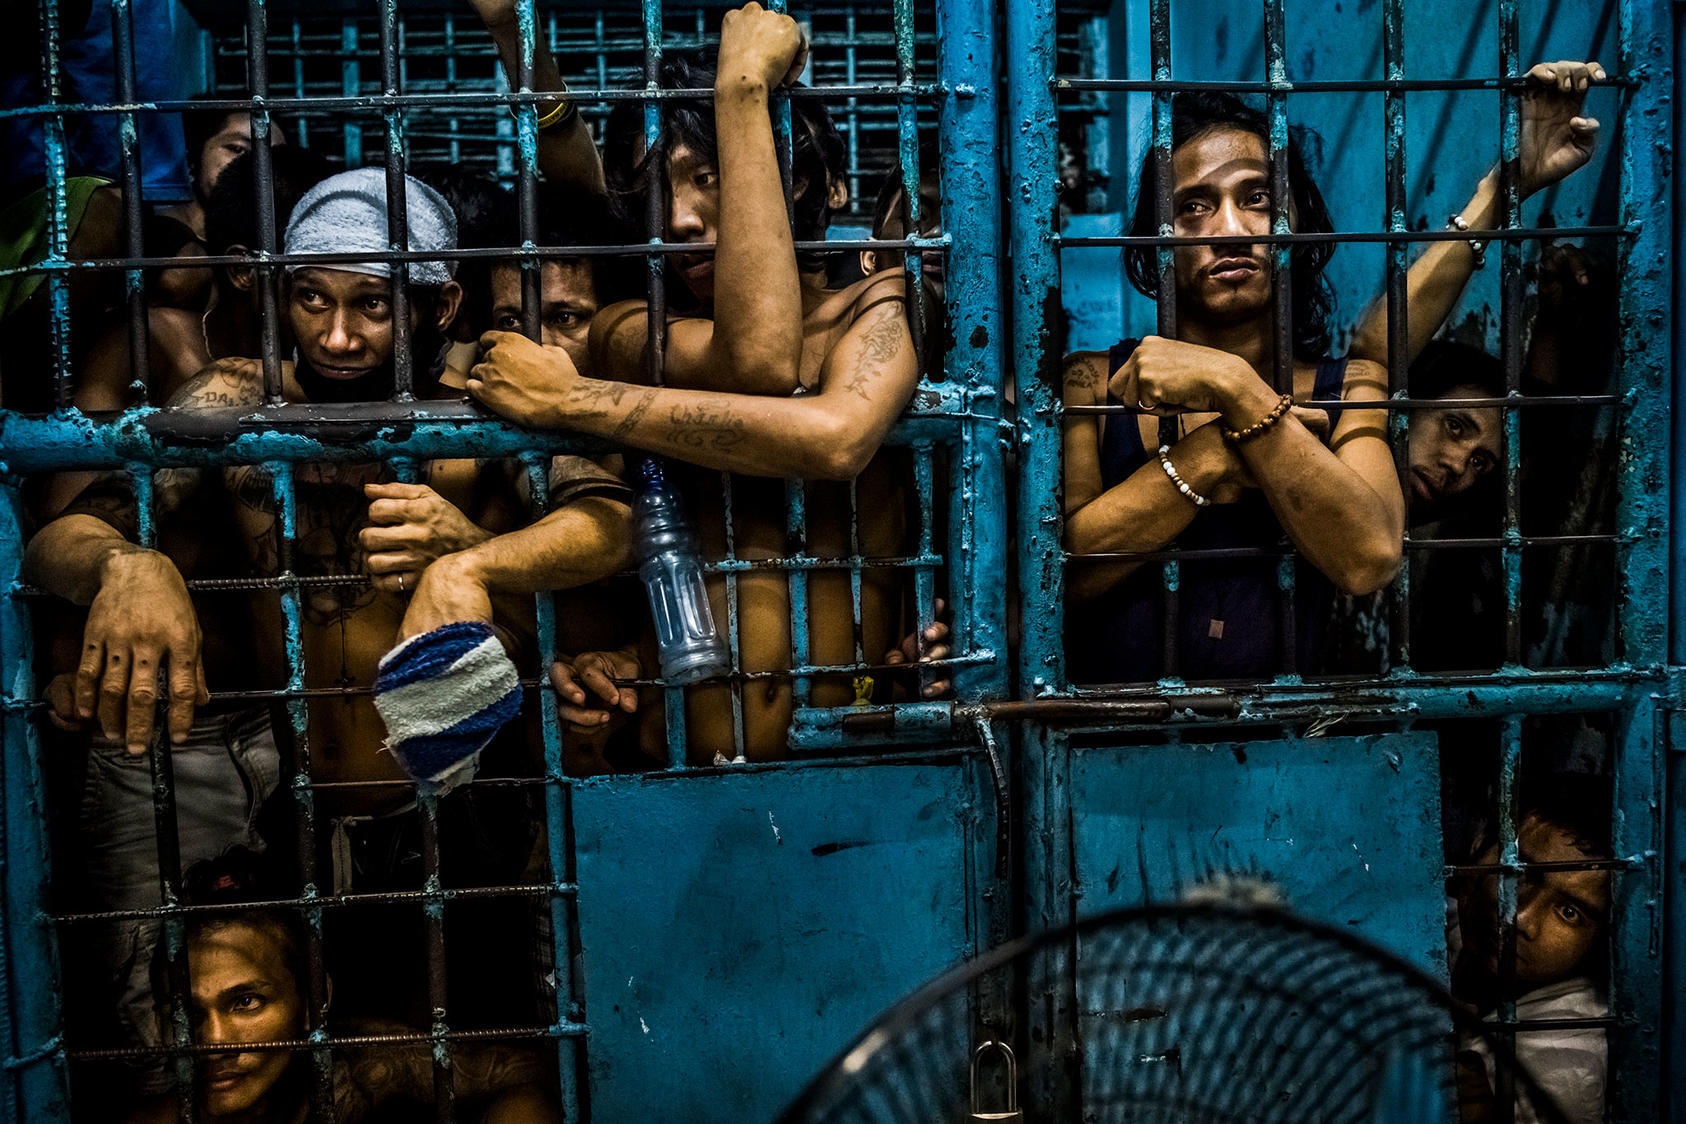 Prisoners await processing in 2016 at a police station in the Philippines, one of many countries where systemic violence by security forces undermines security, according to analysts and human rights monitors. (Daniel Berehulak/The New York Times)